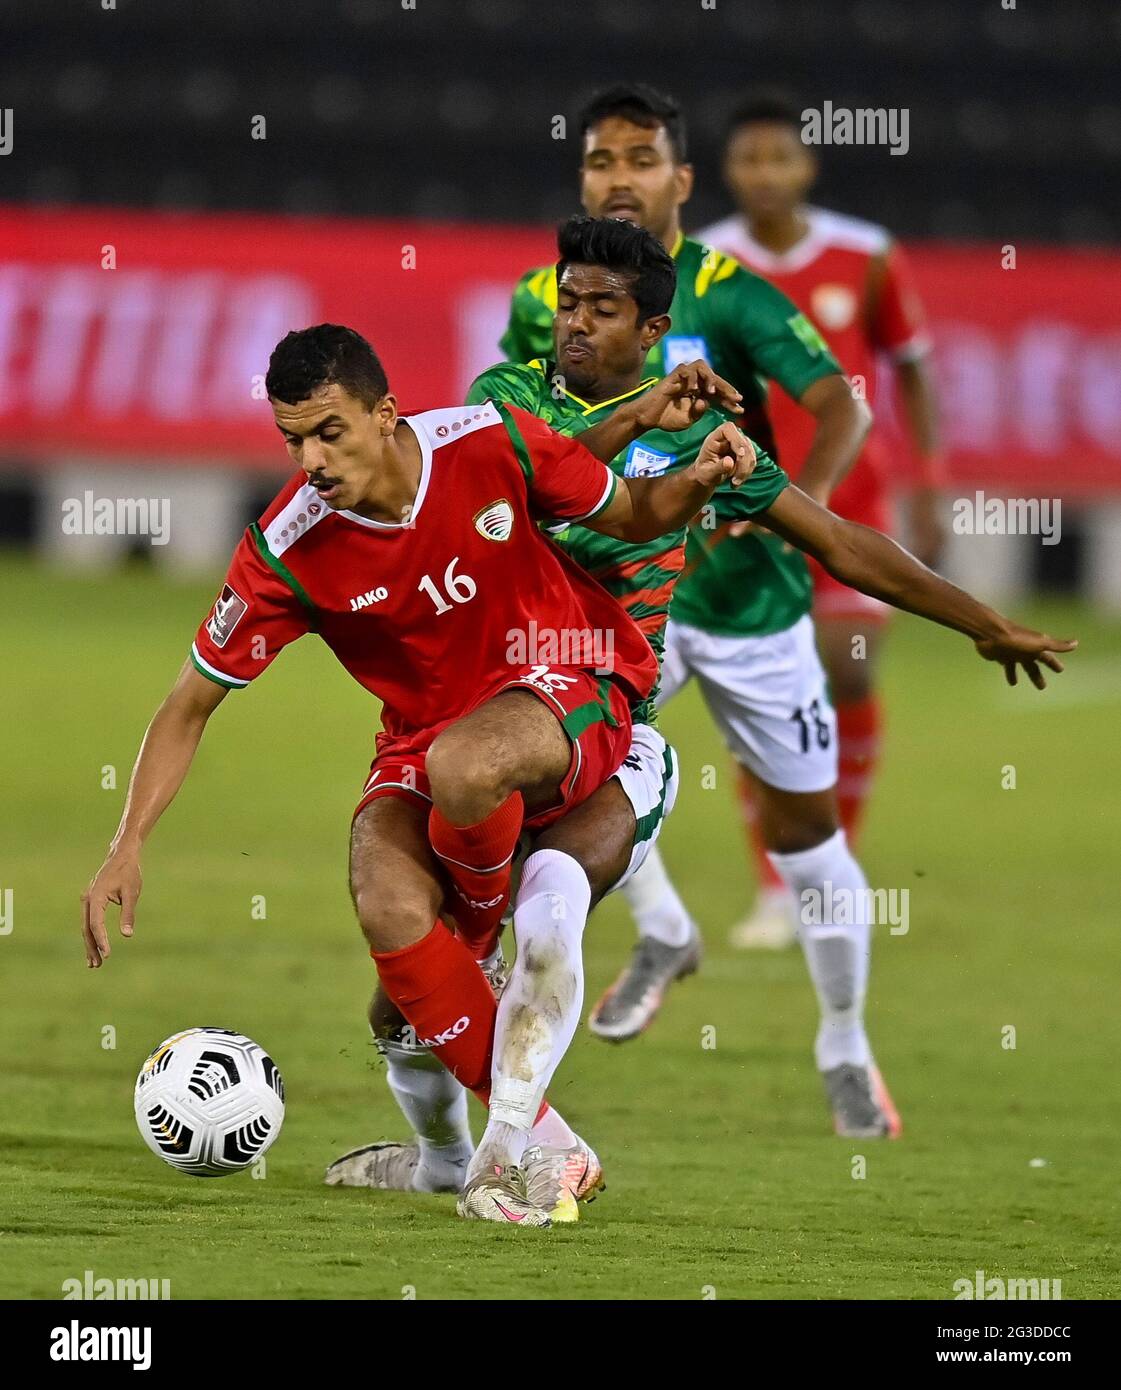 Doha, Qatar. 15th June, 2021. Mohammed Mubarak Al Ghafri (L) of Oman vies with Md Rimon Hossain of Bangladesh during the Group E football match at FIFA World Cup Qatar 2022 and AFC Asian Cup China 2023 Preliminary Joint Qualification in Doha, Qatar, June 15, 2021. Credit: Nikku/Xinhua/Alamy Live News Stock Photo